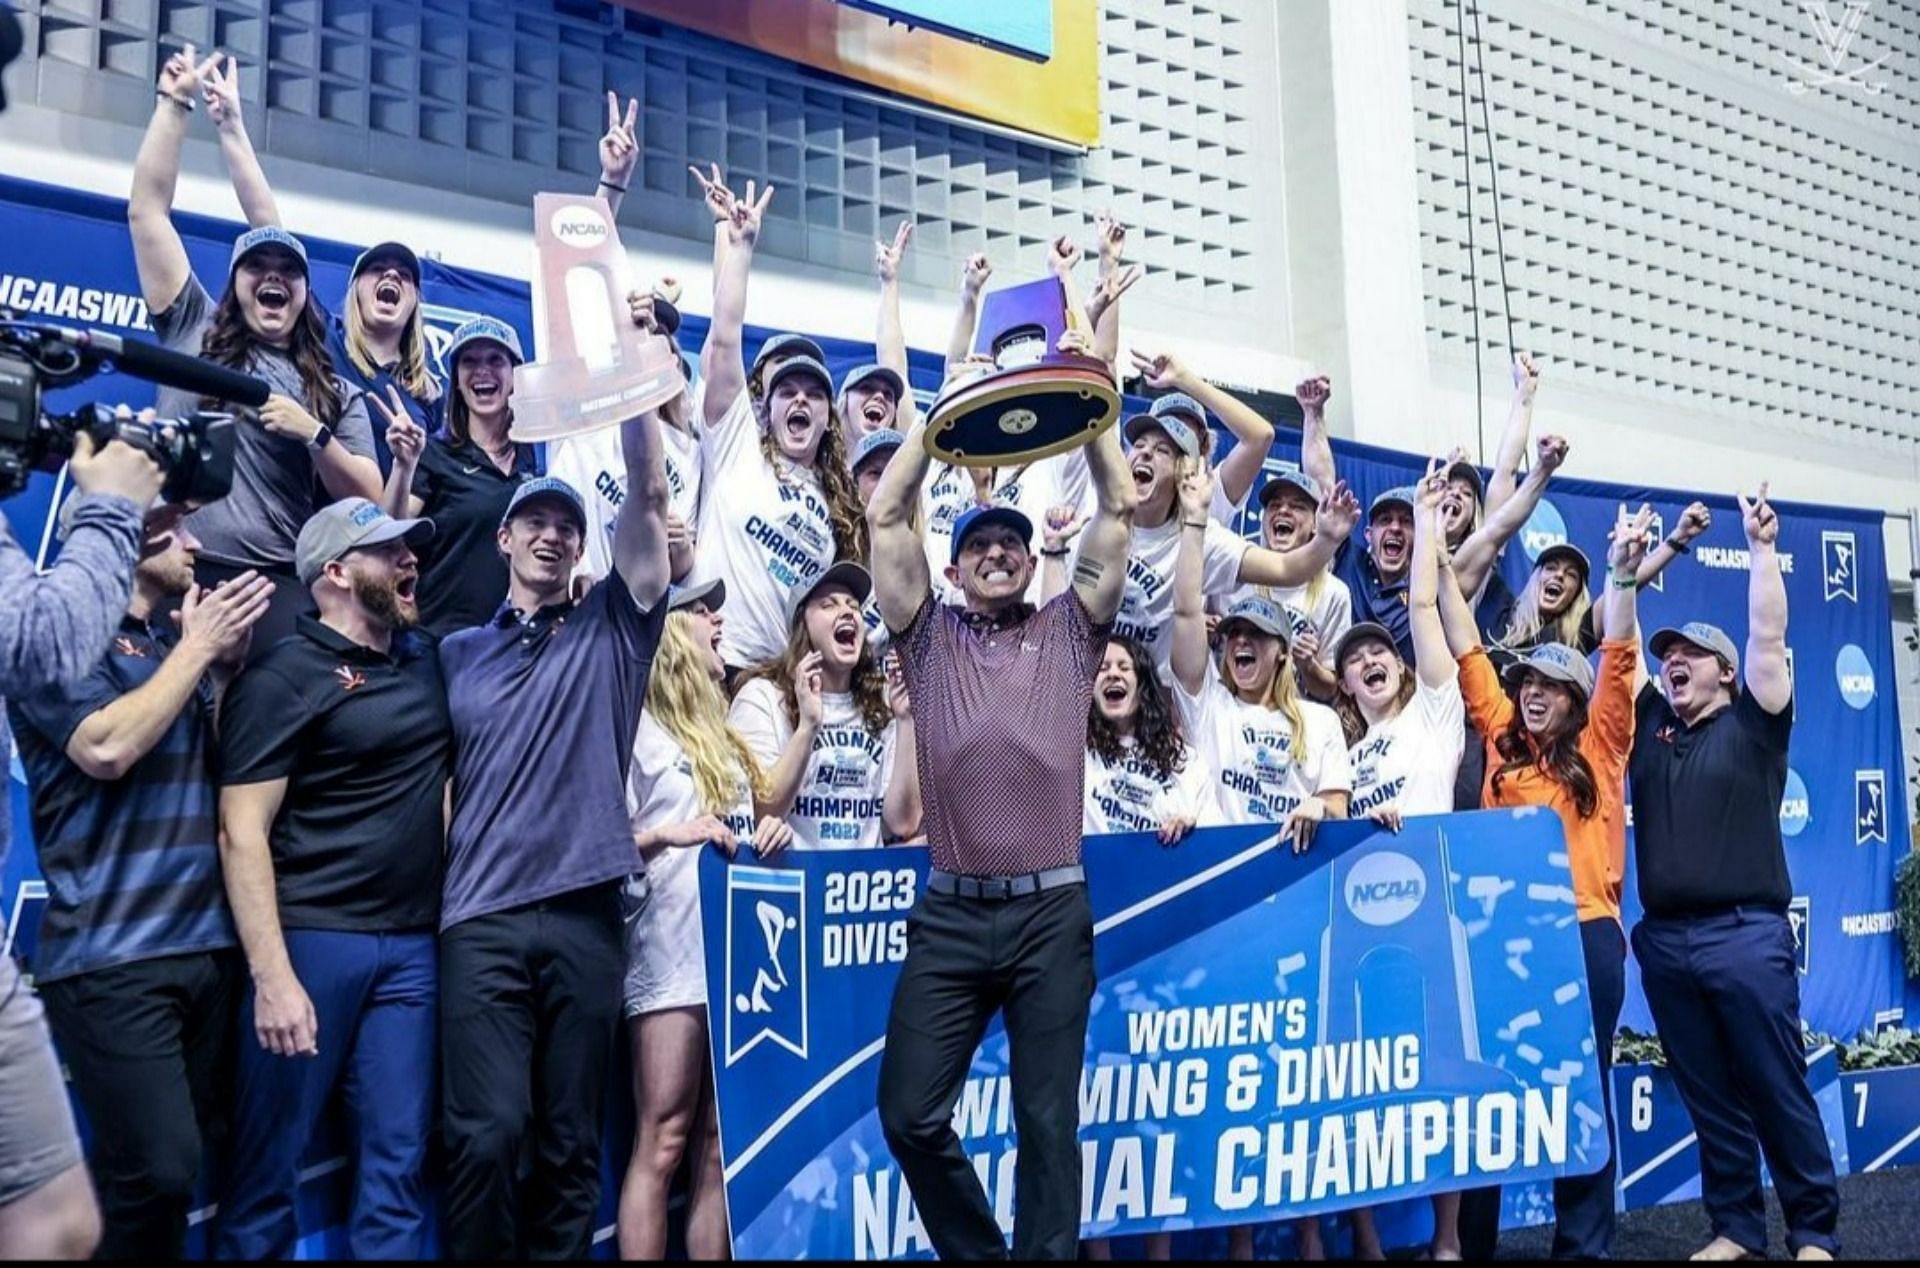 University of Virginia celebrate after winning the 2023 NCAA Swimming and Diving Championships (Image via virginiasports/Instagram)